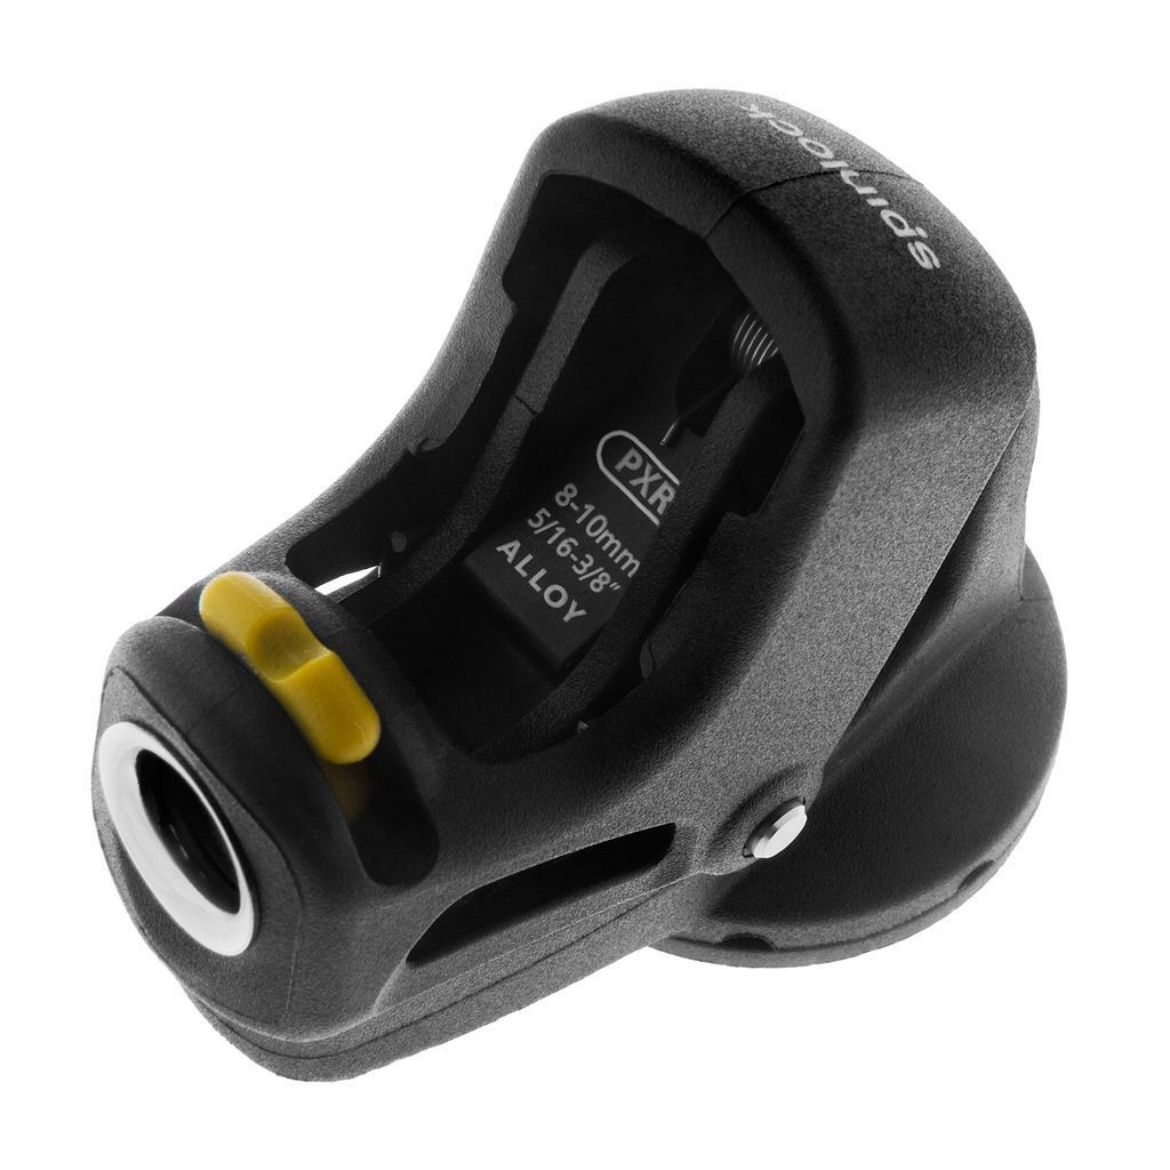 Picture of Spinlock PXR 8-10mm Swivel Base Cam Cleat